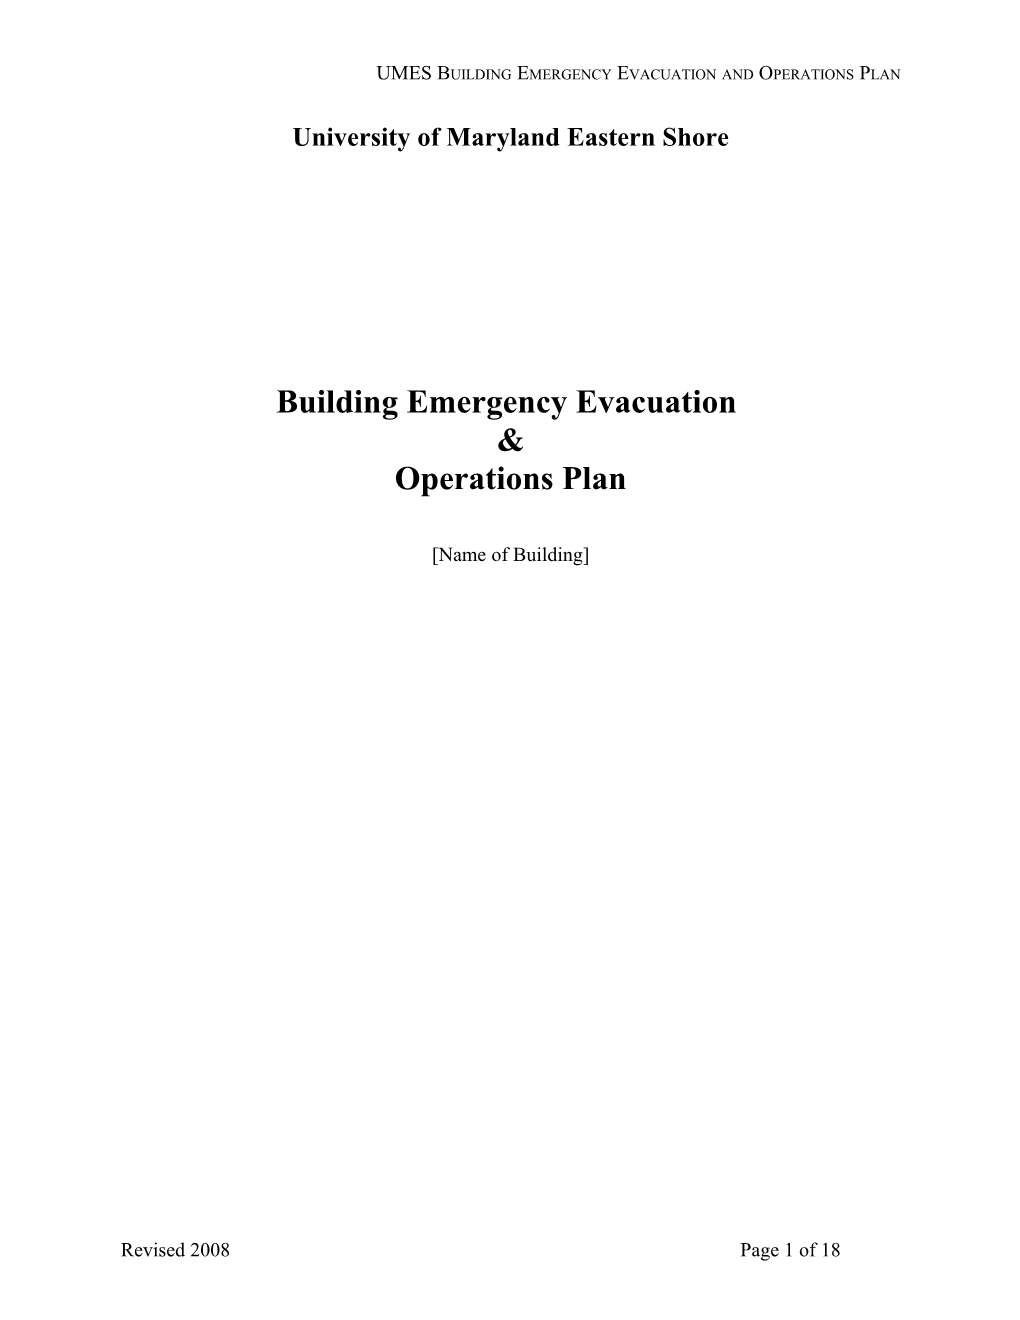 UMES Building Emergency Evacuation and Operations Plan